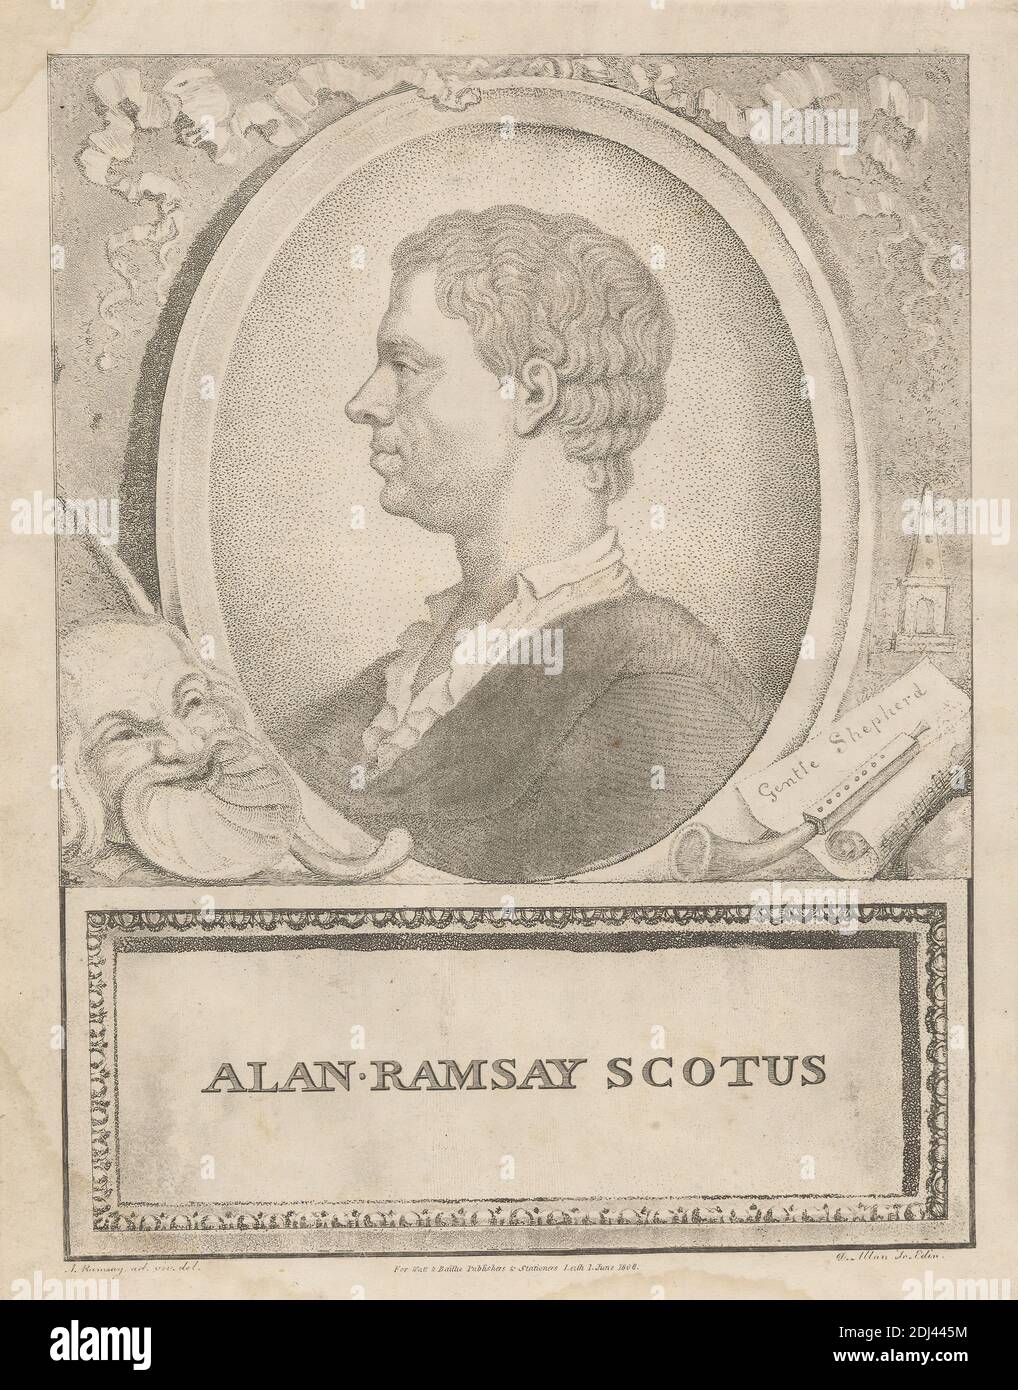 Alan Ramsay Scotus, Print made by David Allan, 1744–1796, British, born in Scotland, after Allan Ramsay, 1686–1758, British, Published by Watt & Baillie, active 1808, British, 1808, Aquatint, stipple engraving, and etching on moderately thick, slightly textured, cream wove paper, Sheet: 11 1/8 x 8 7/8 inches (28.3 x 22.5 cm), Plate: 10 1/16 x 7 13/16 inches (25.6 x 19.9 cm), and Image: 9 1/8 x 6 15/16 inches (23.2 x 17.6 cm), bust, collar, frame (furnishing), frontispiece (illustration), horns, illustration, man, mask, poem, portrait, profile, ribbons, scroll (motif), self-portrait, sheet Stock Photo